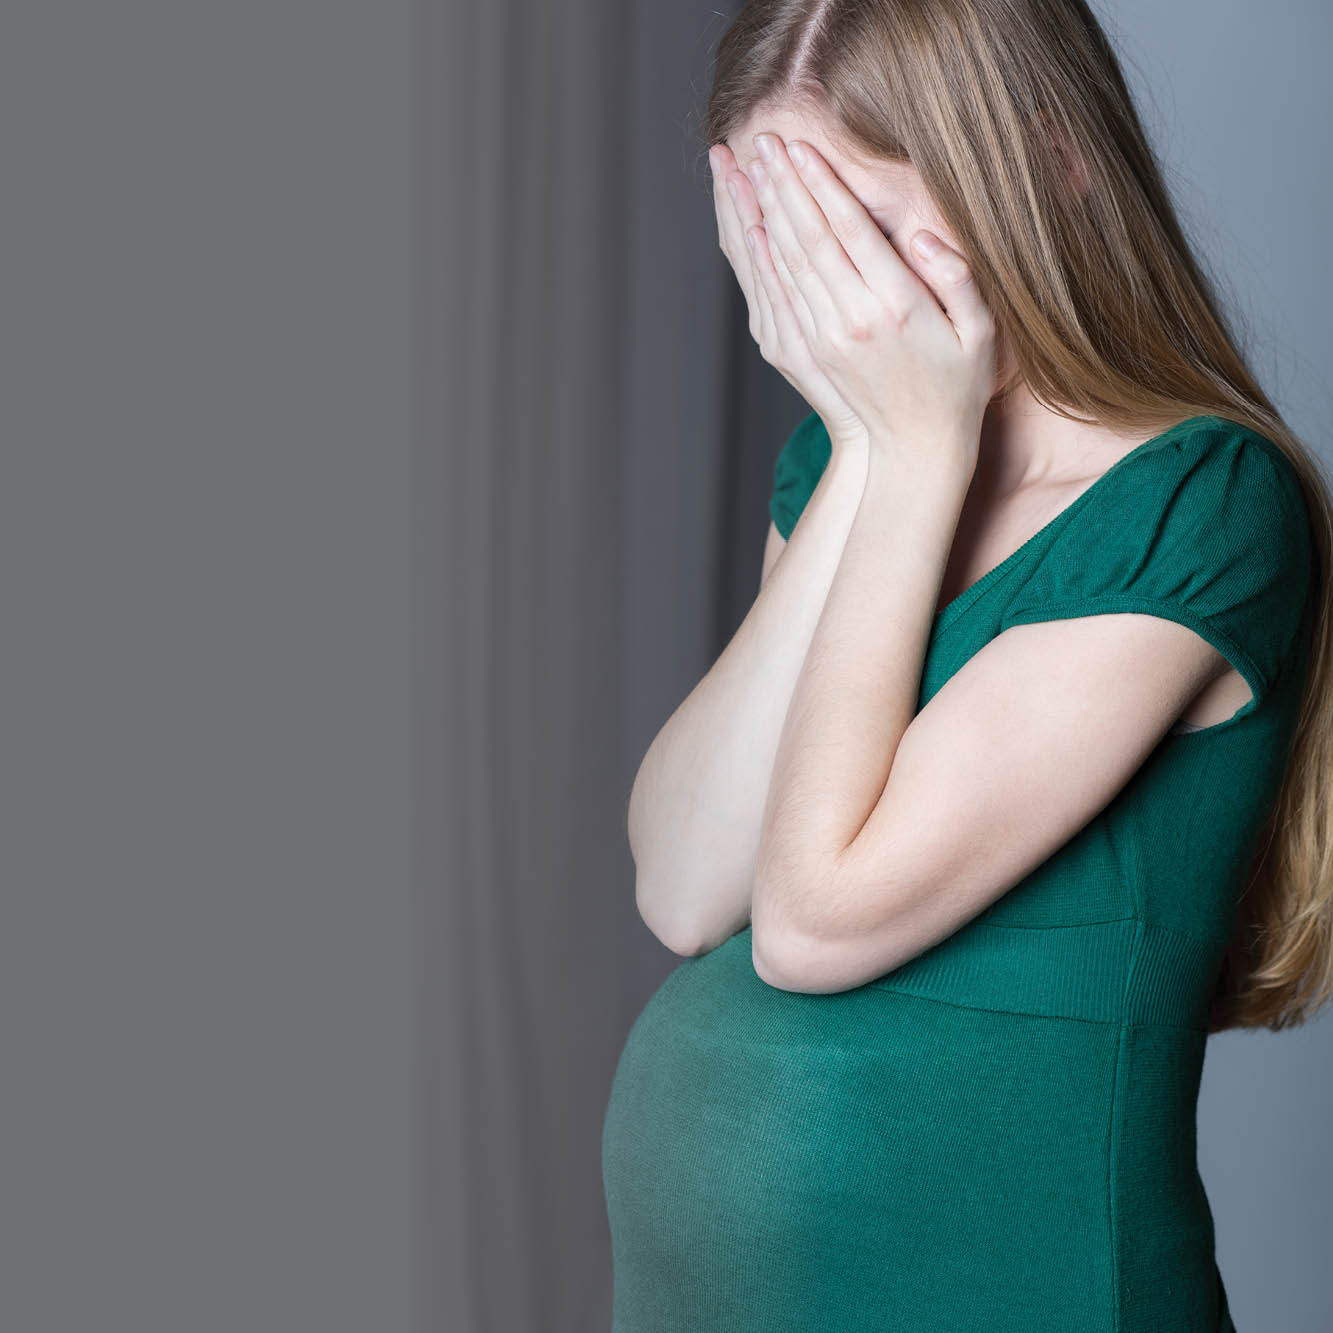 A photo shows a pregnant woman with her hands over her face. 